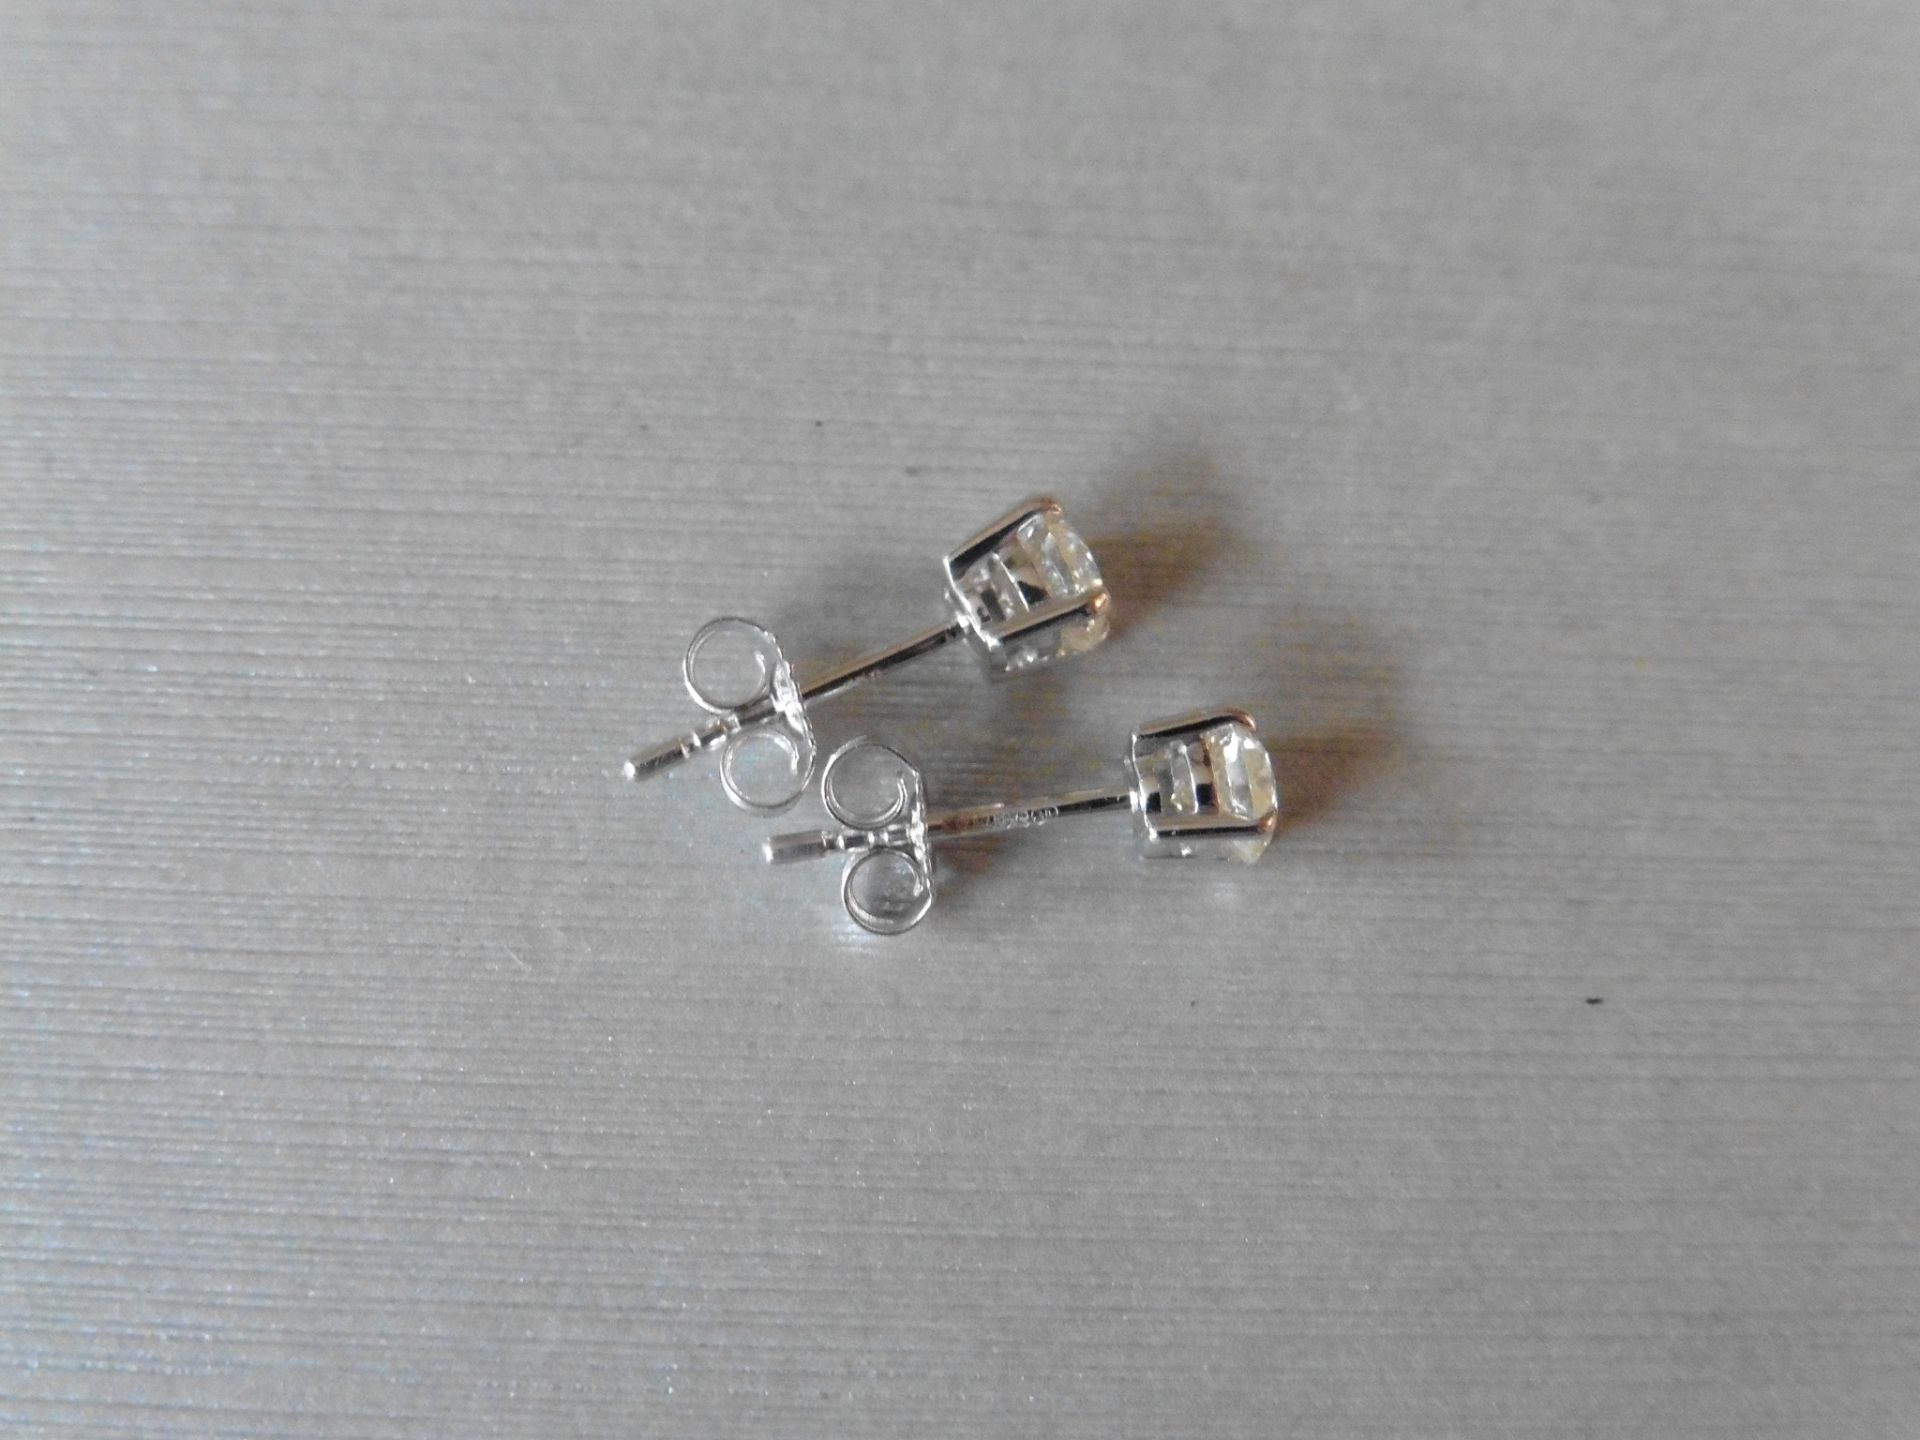 0.80ct Solitaire diamond stud earrings set with brilliant cut diamonds, SI2 clarity and I colour. - Image 2 of 2